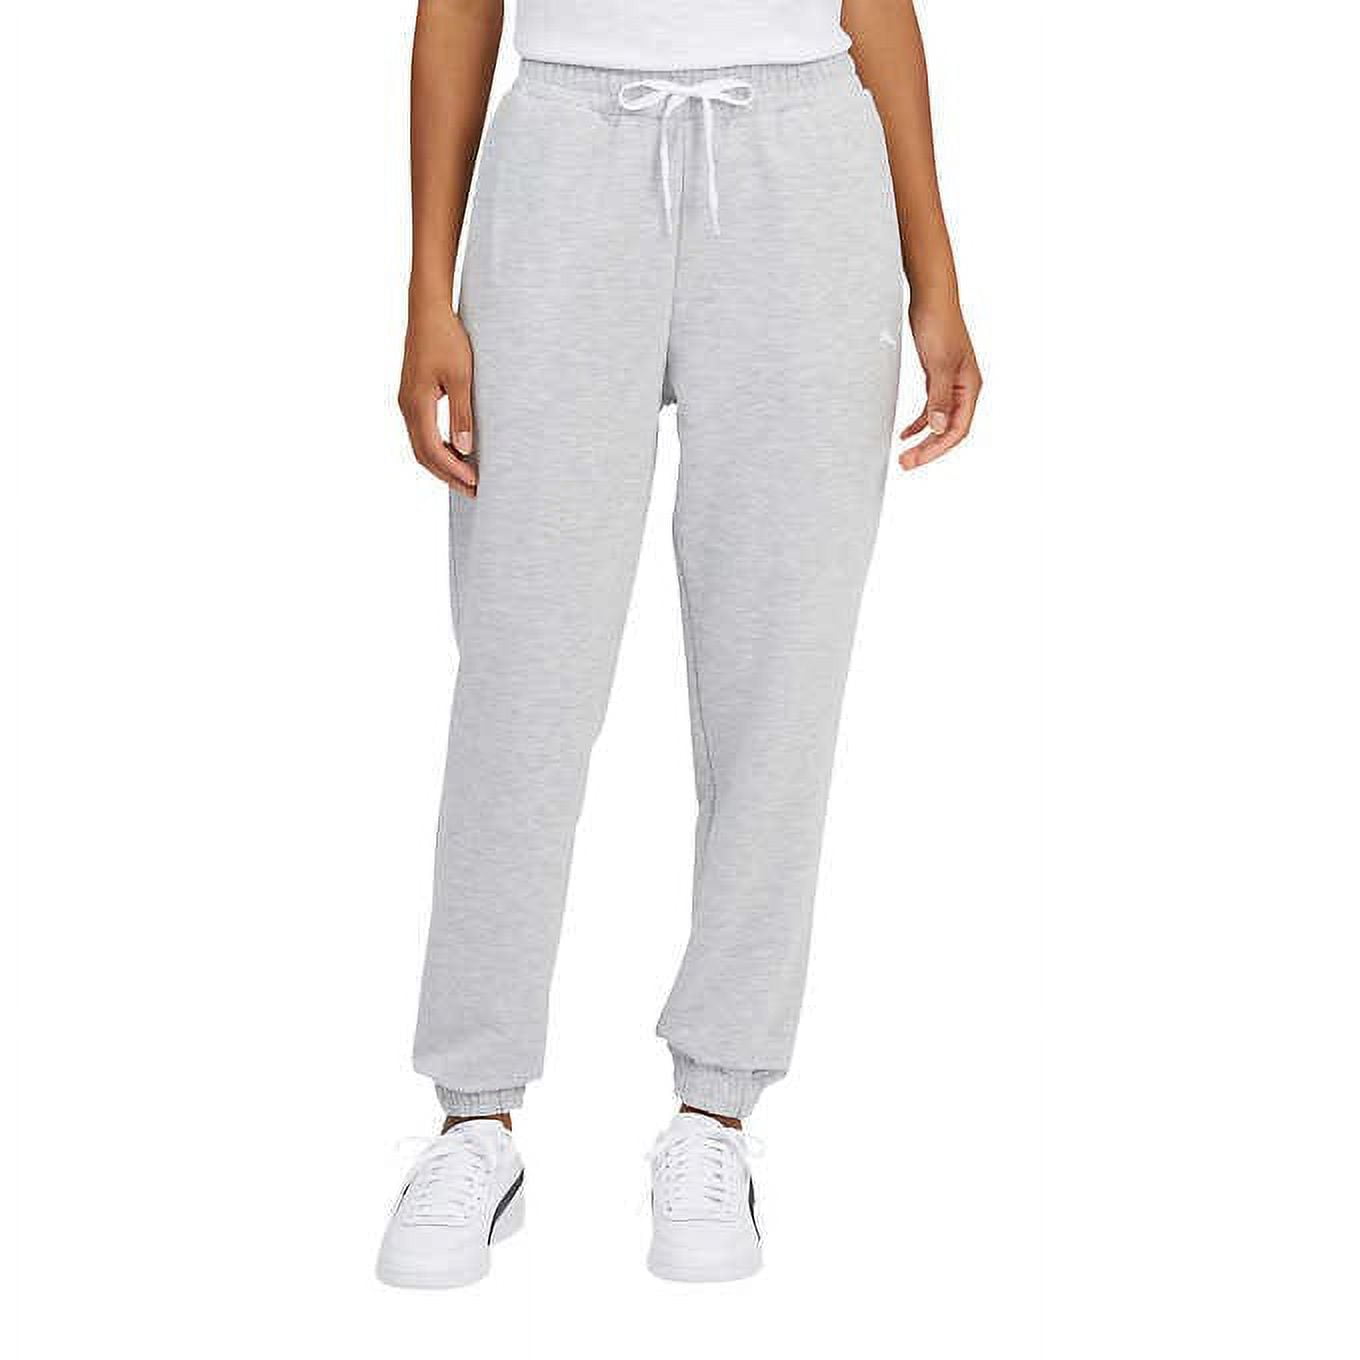 Buy Puma Men Grey Track Pants Online at Low Prices in India - Paytmmall.com